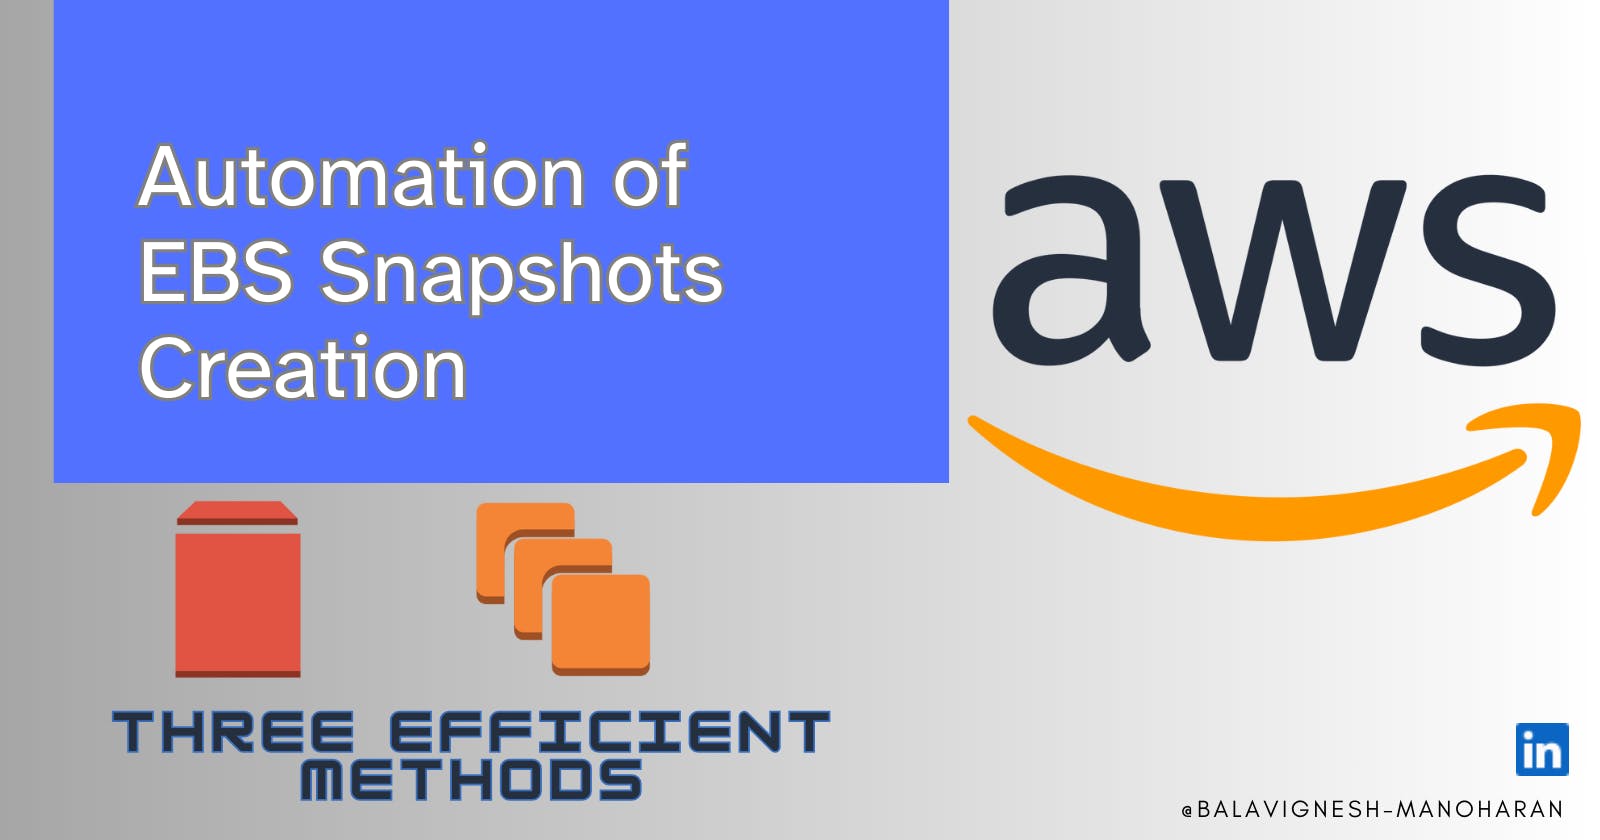 Automate Your AWS EC2 Backup: A Guide to EBS Snapshot Creation